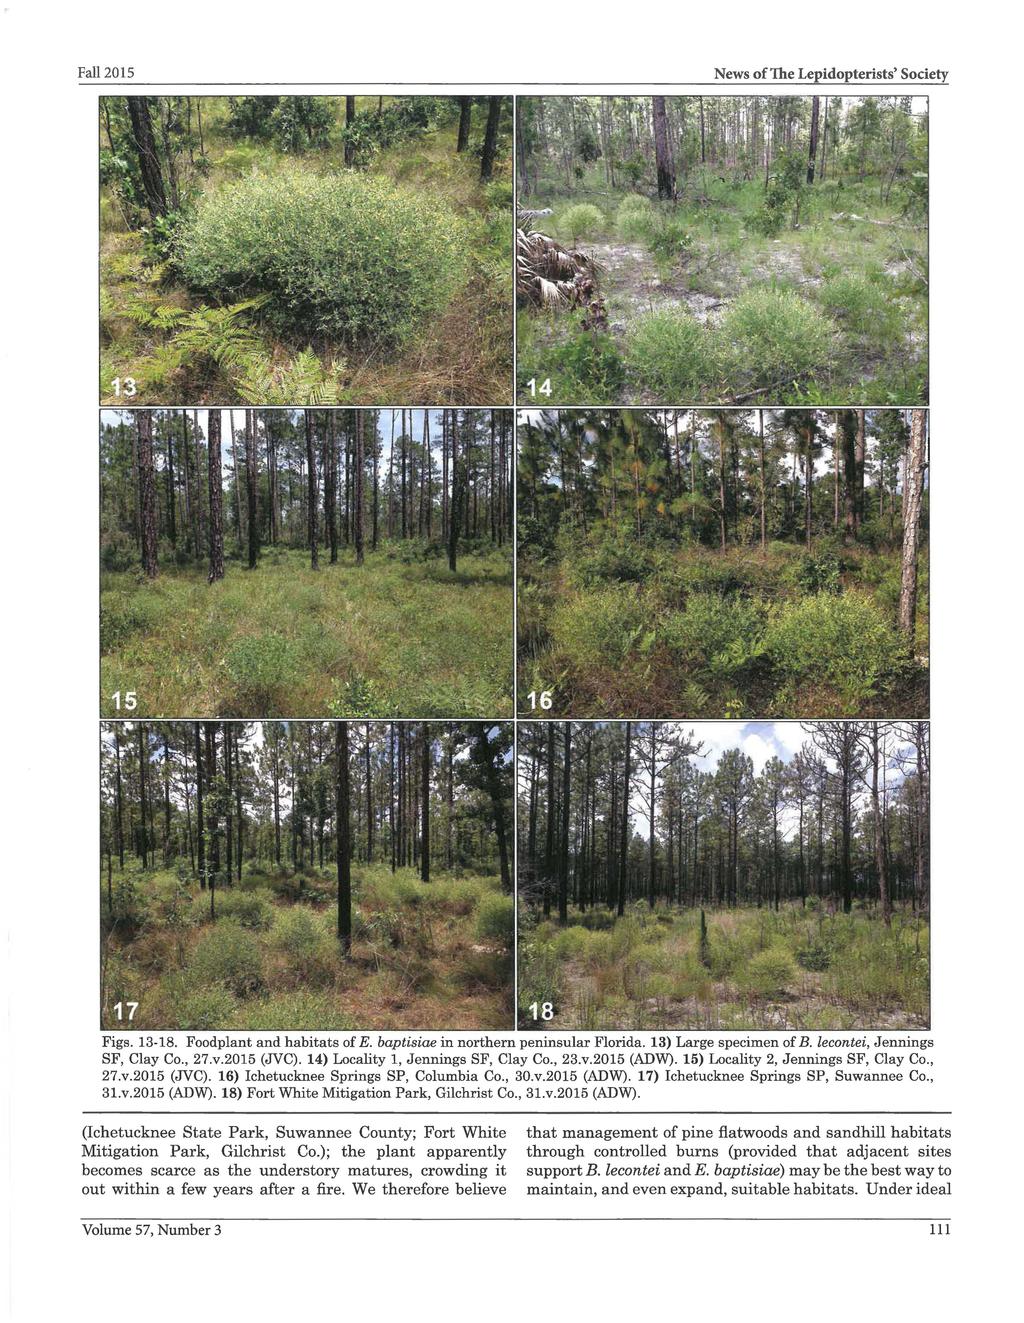 Figs. 13-18. Foodplant and habitats of E. baptisiae in northern peninsular Florida. 13) Large specimen of B. lecontei, Jennings SF, Clay Co., 27.v.2015 (JVC). 14) Locality 1, Jennings SF, Clay Co.